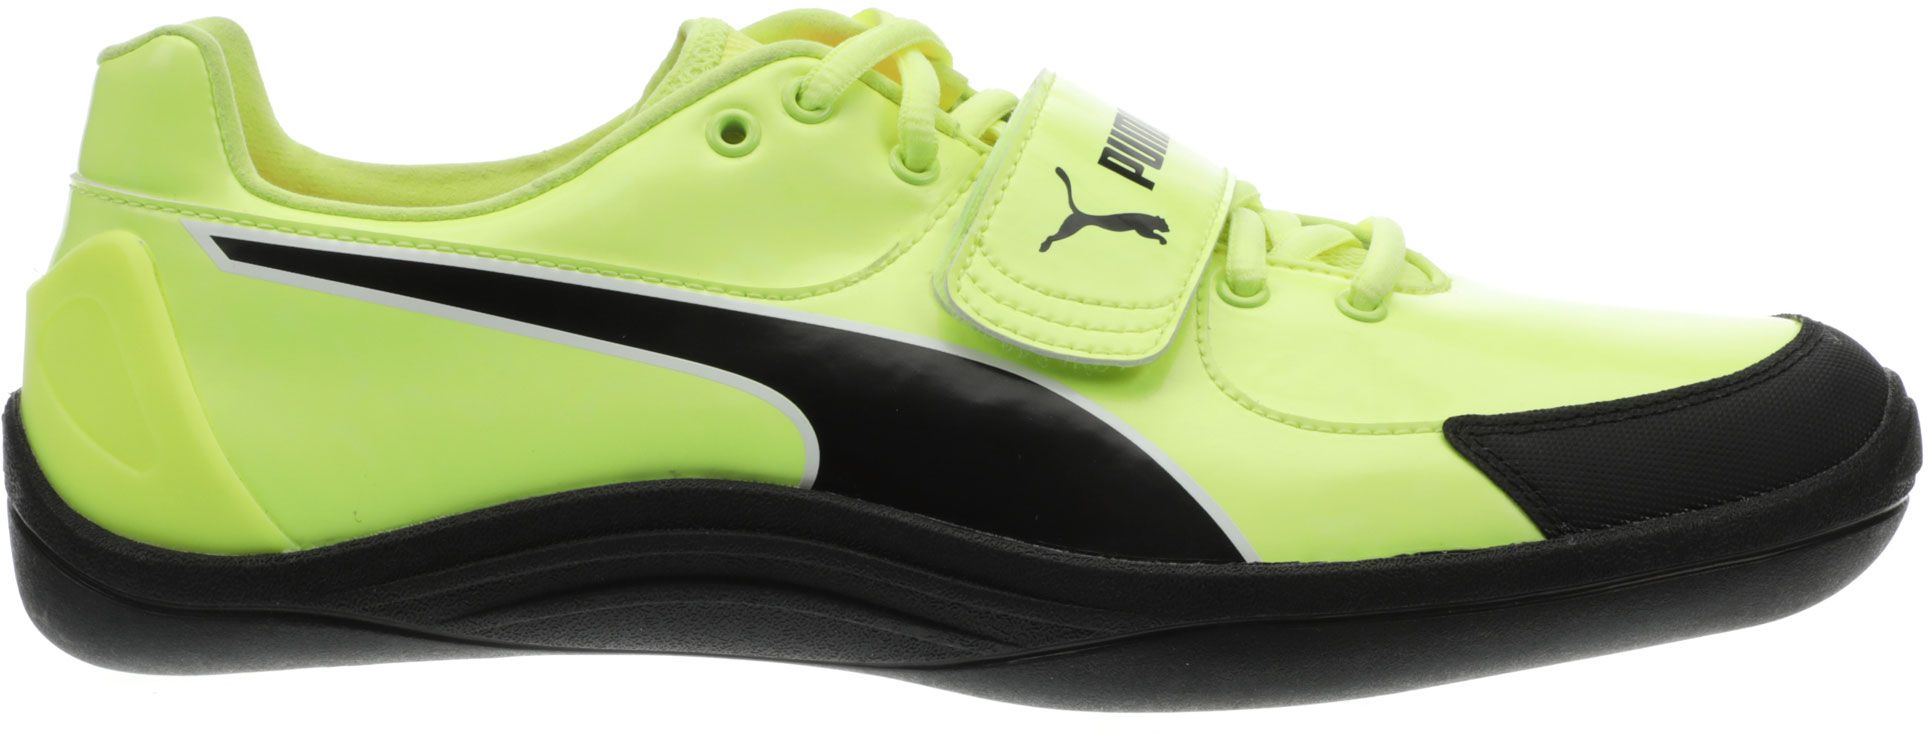 puma discus throwing shoes